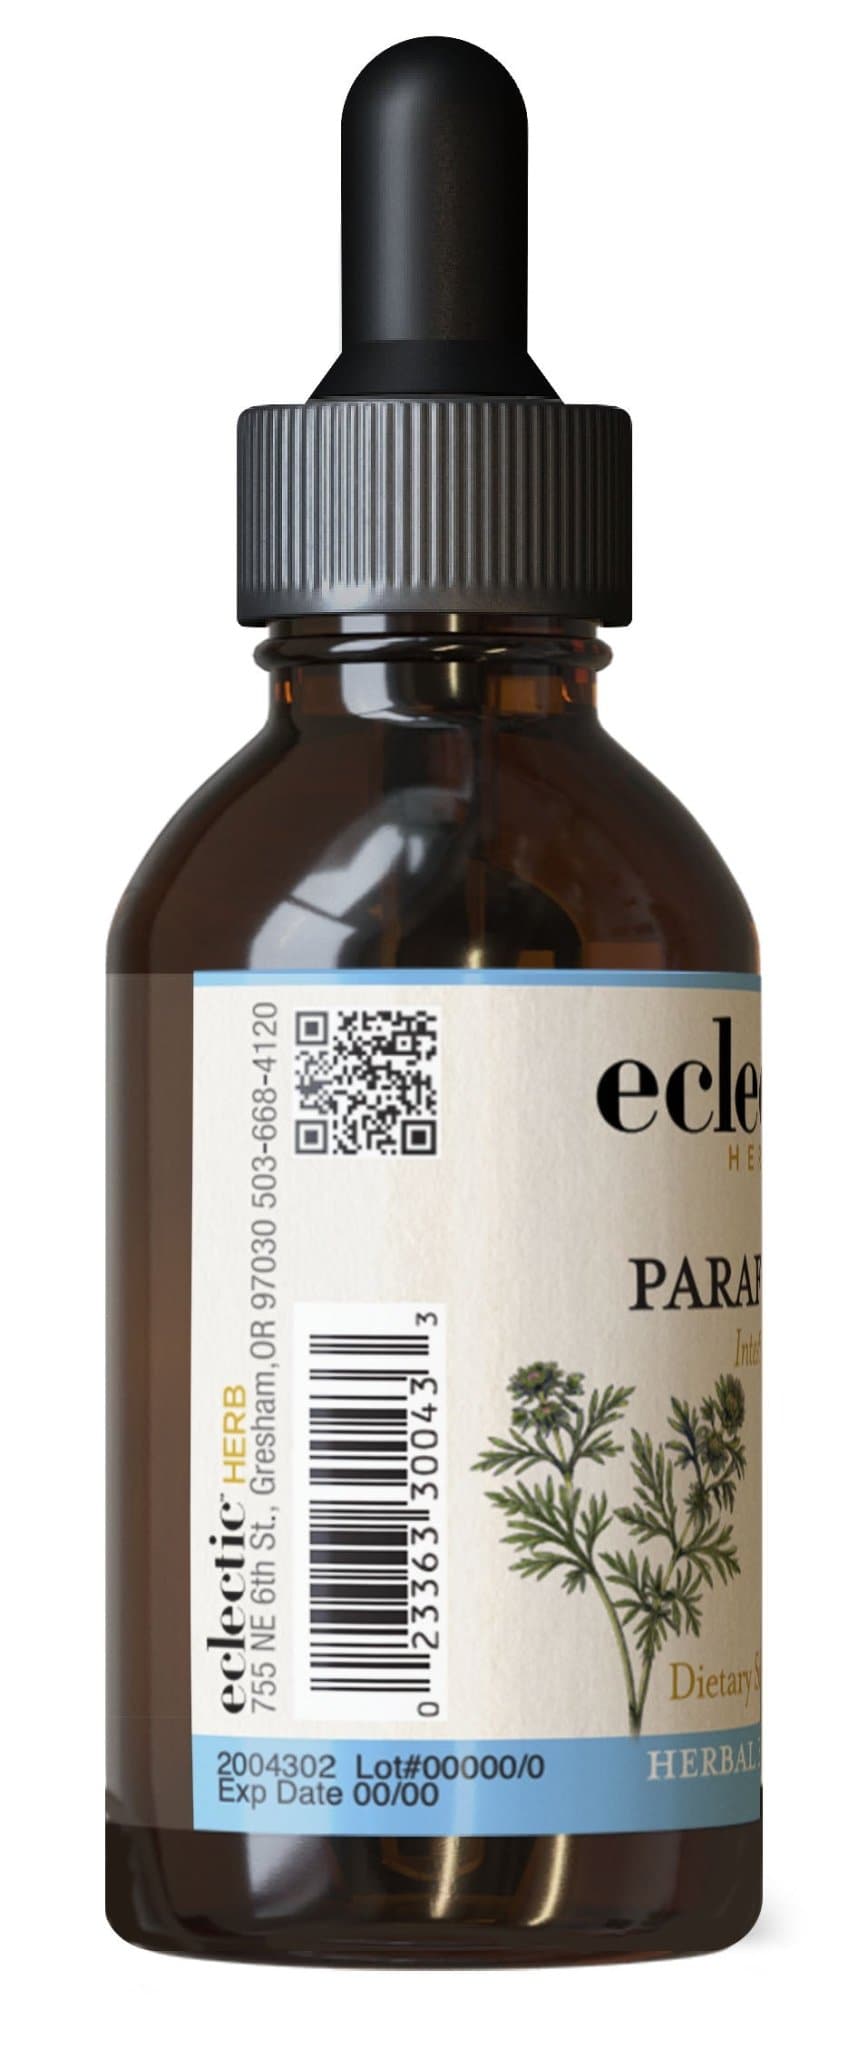 ParaFight Extract - eclecticherb